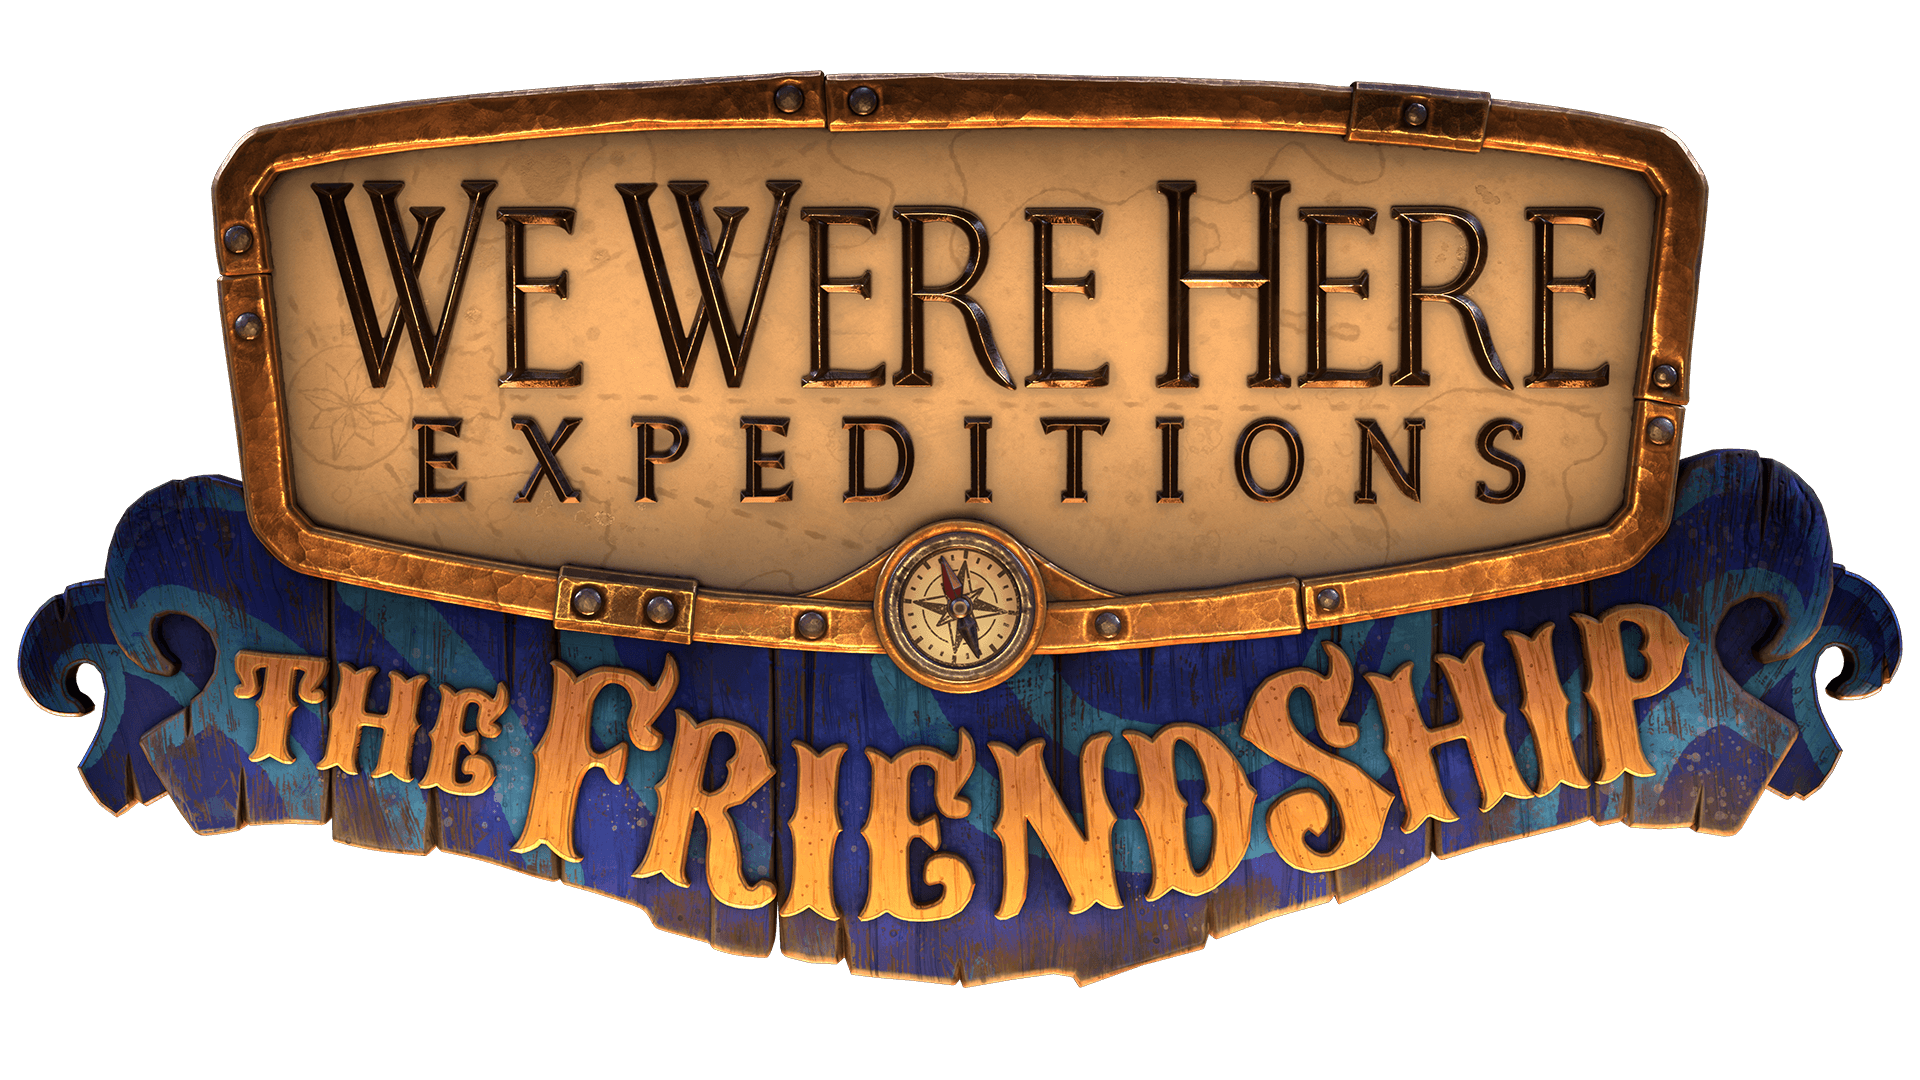 We Were Here Forever Gets Consoles Release Date, Cross Play 